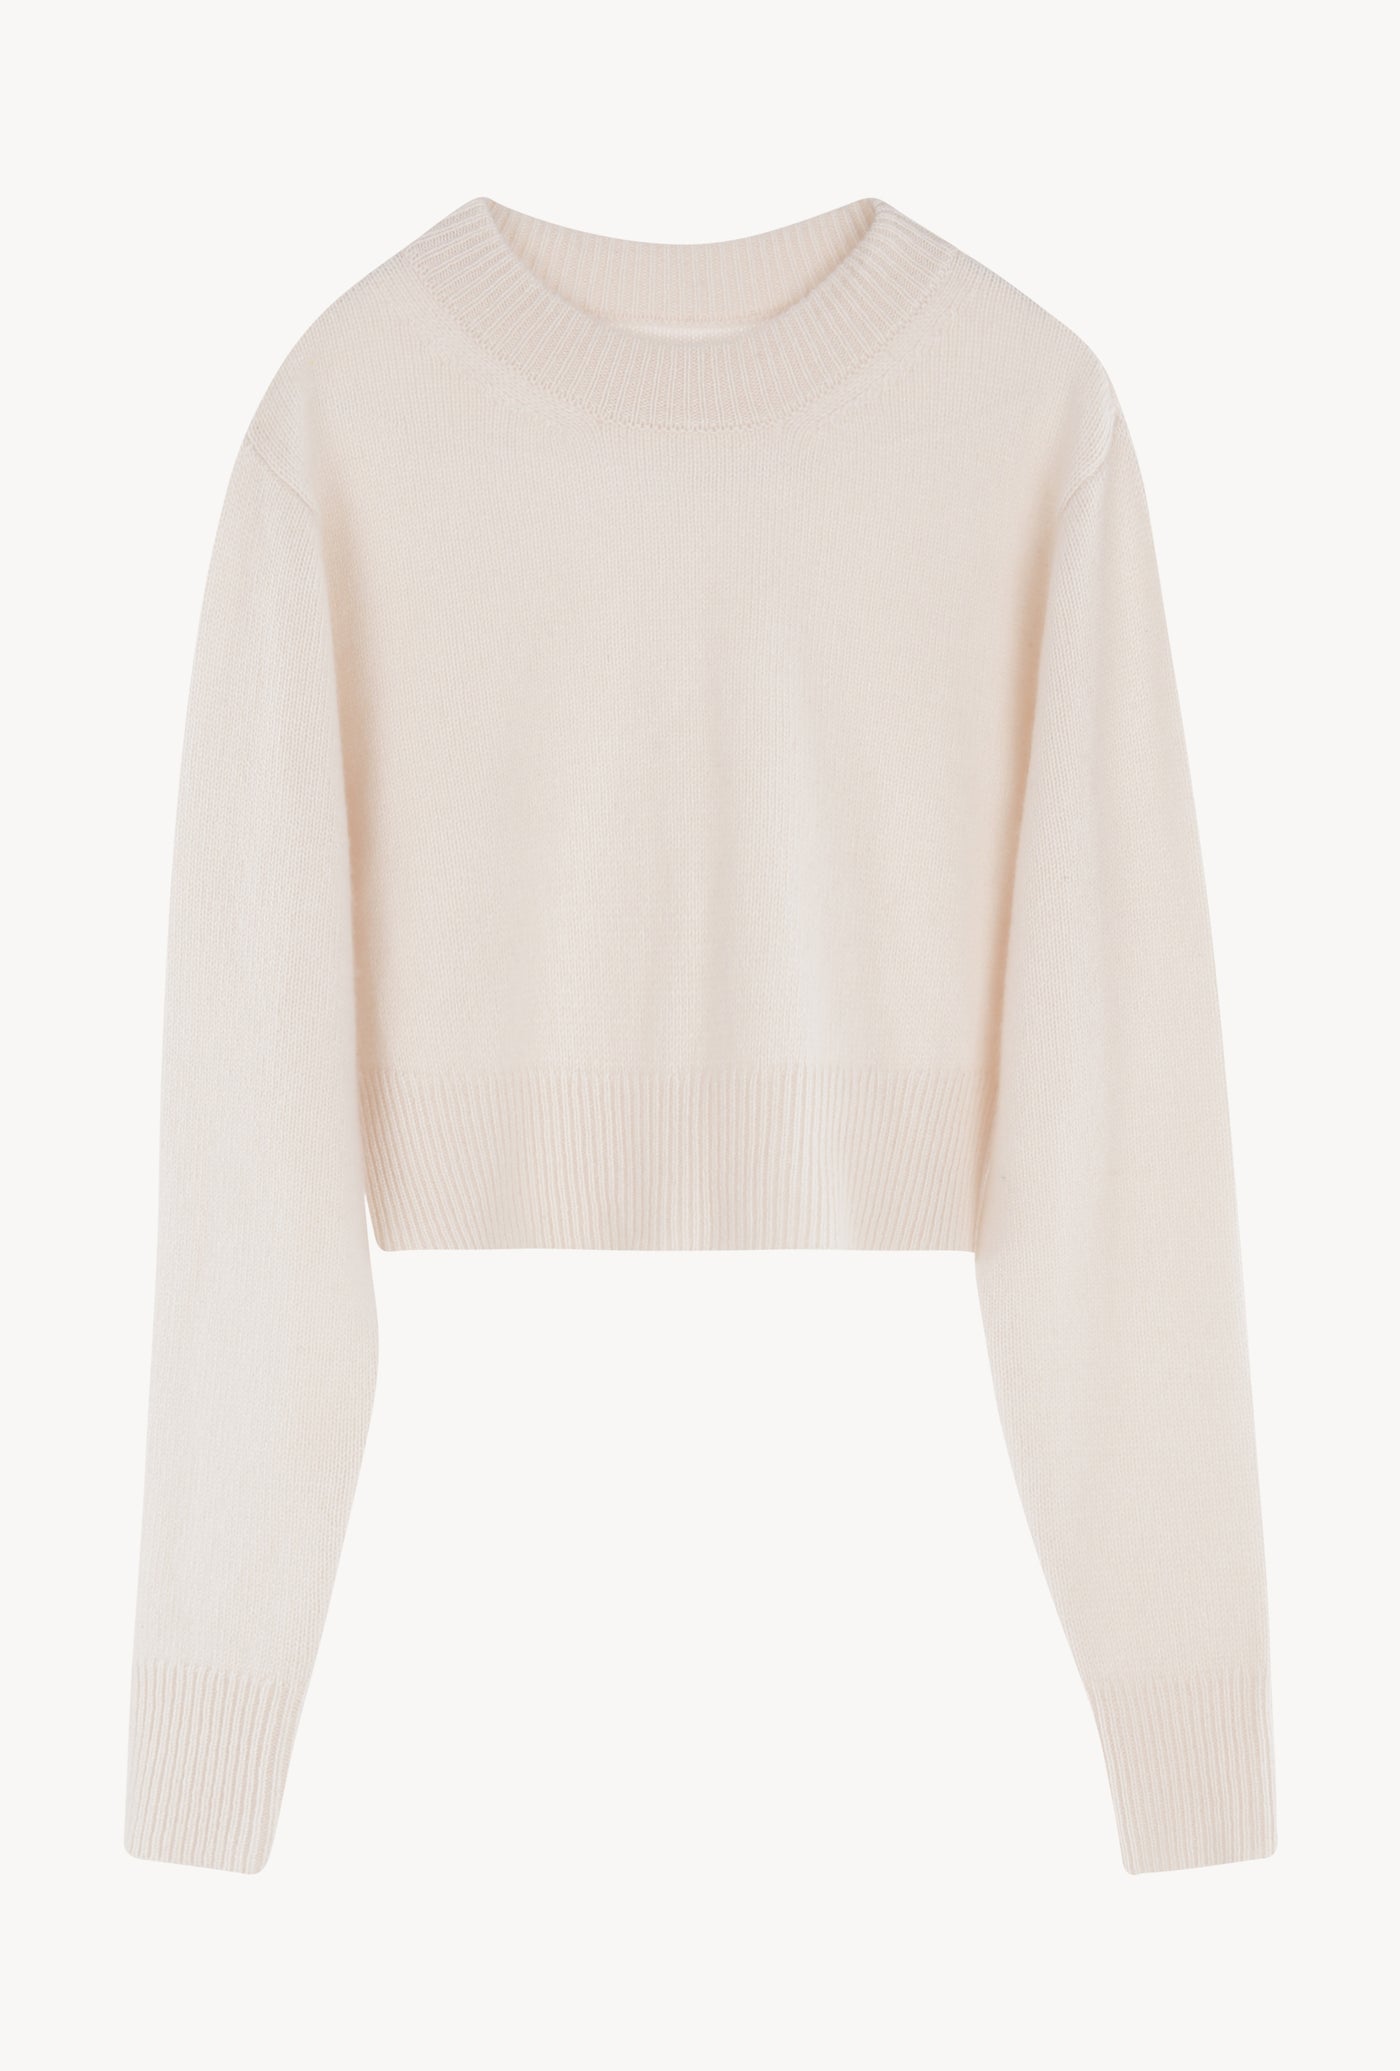 Vintage White Cashmere Cropped Sweater